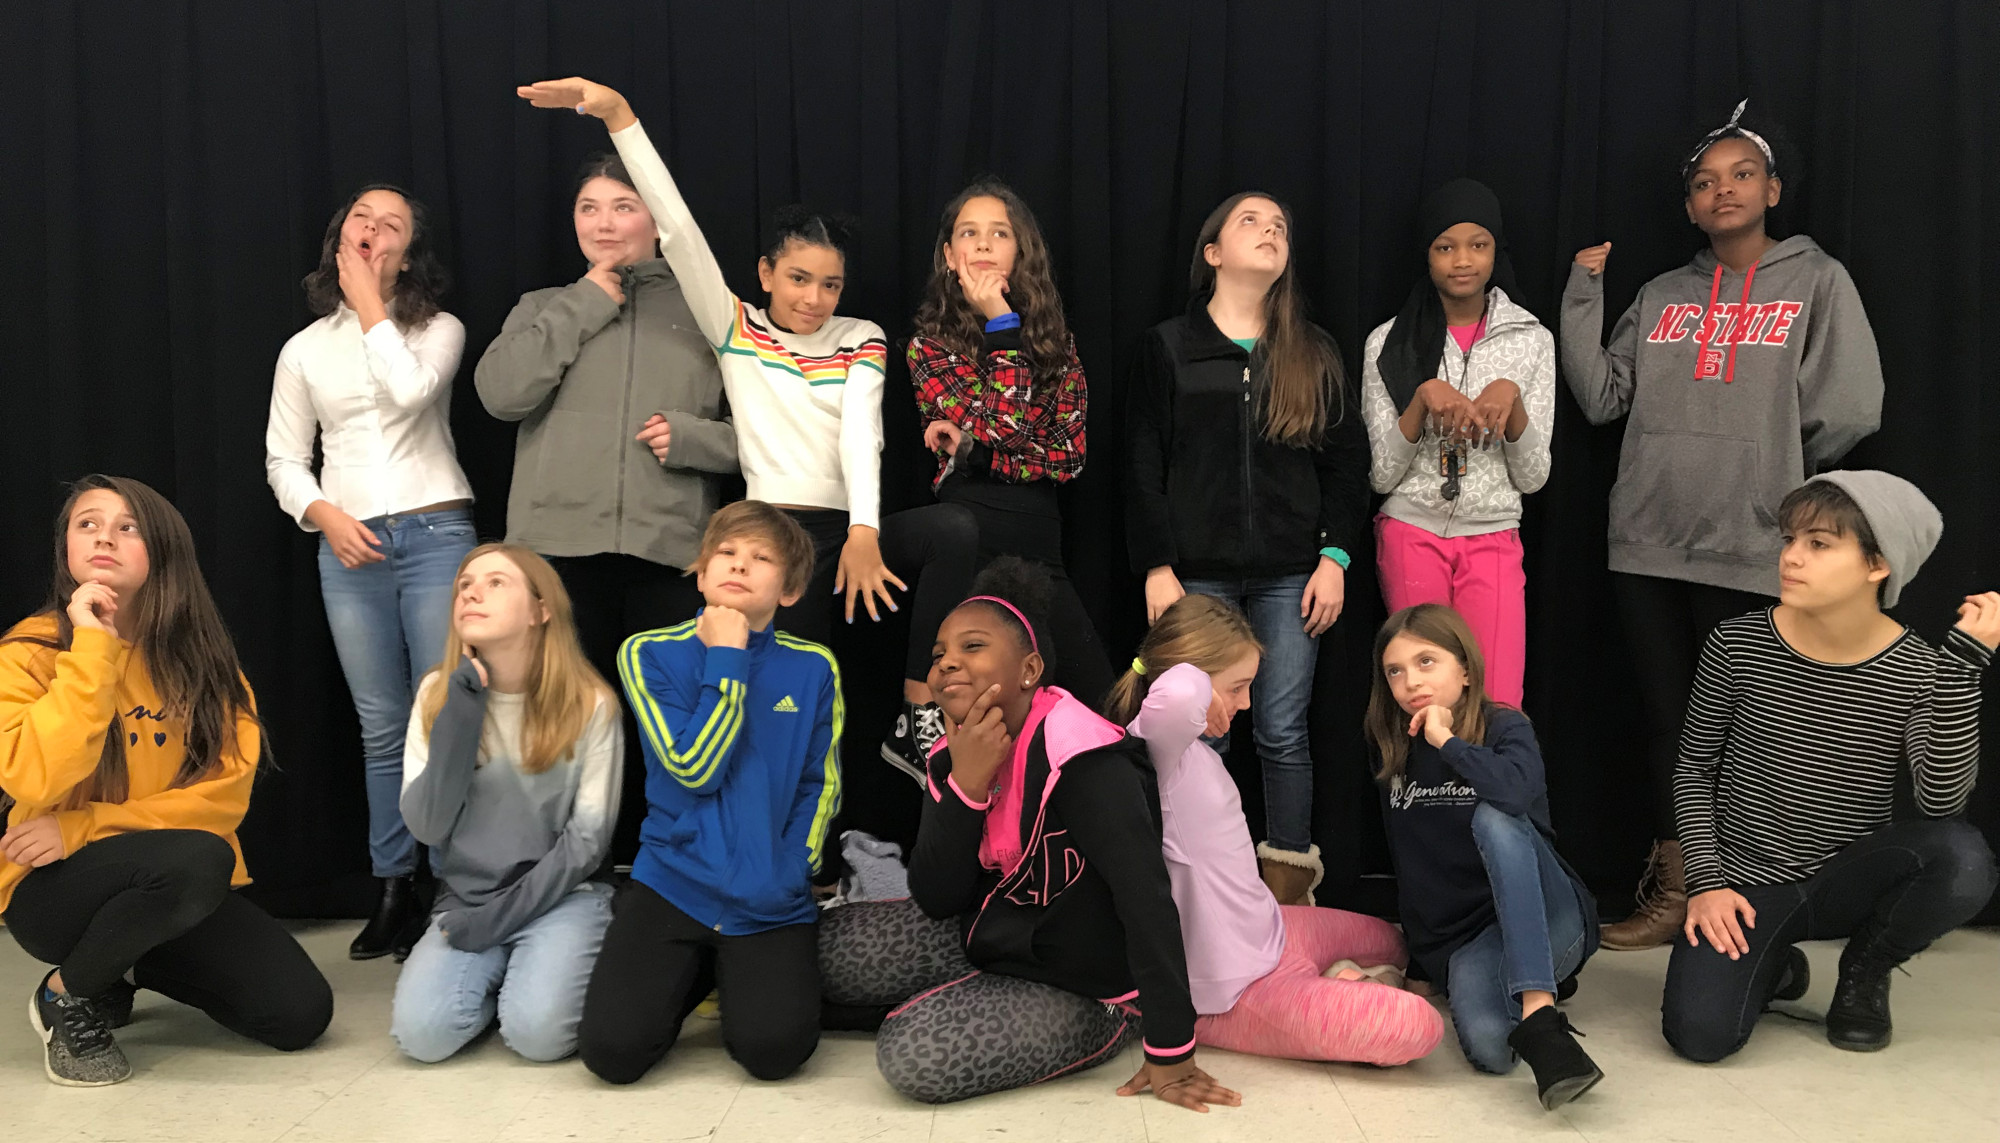 The RLT Players To Go! troupe for 2019